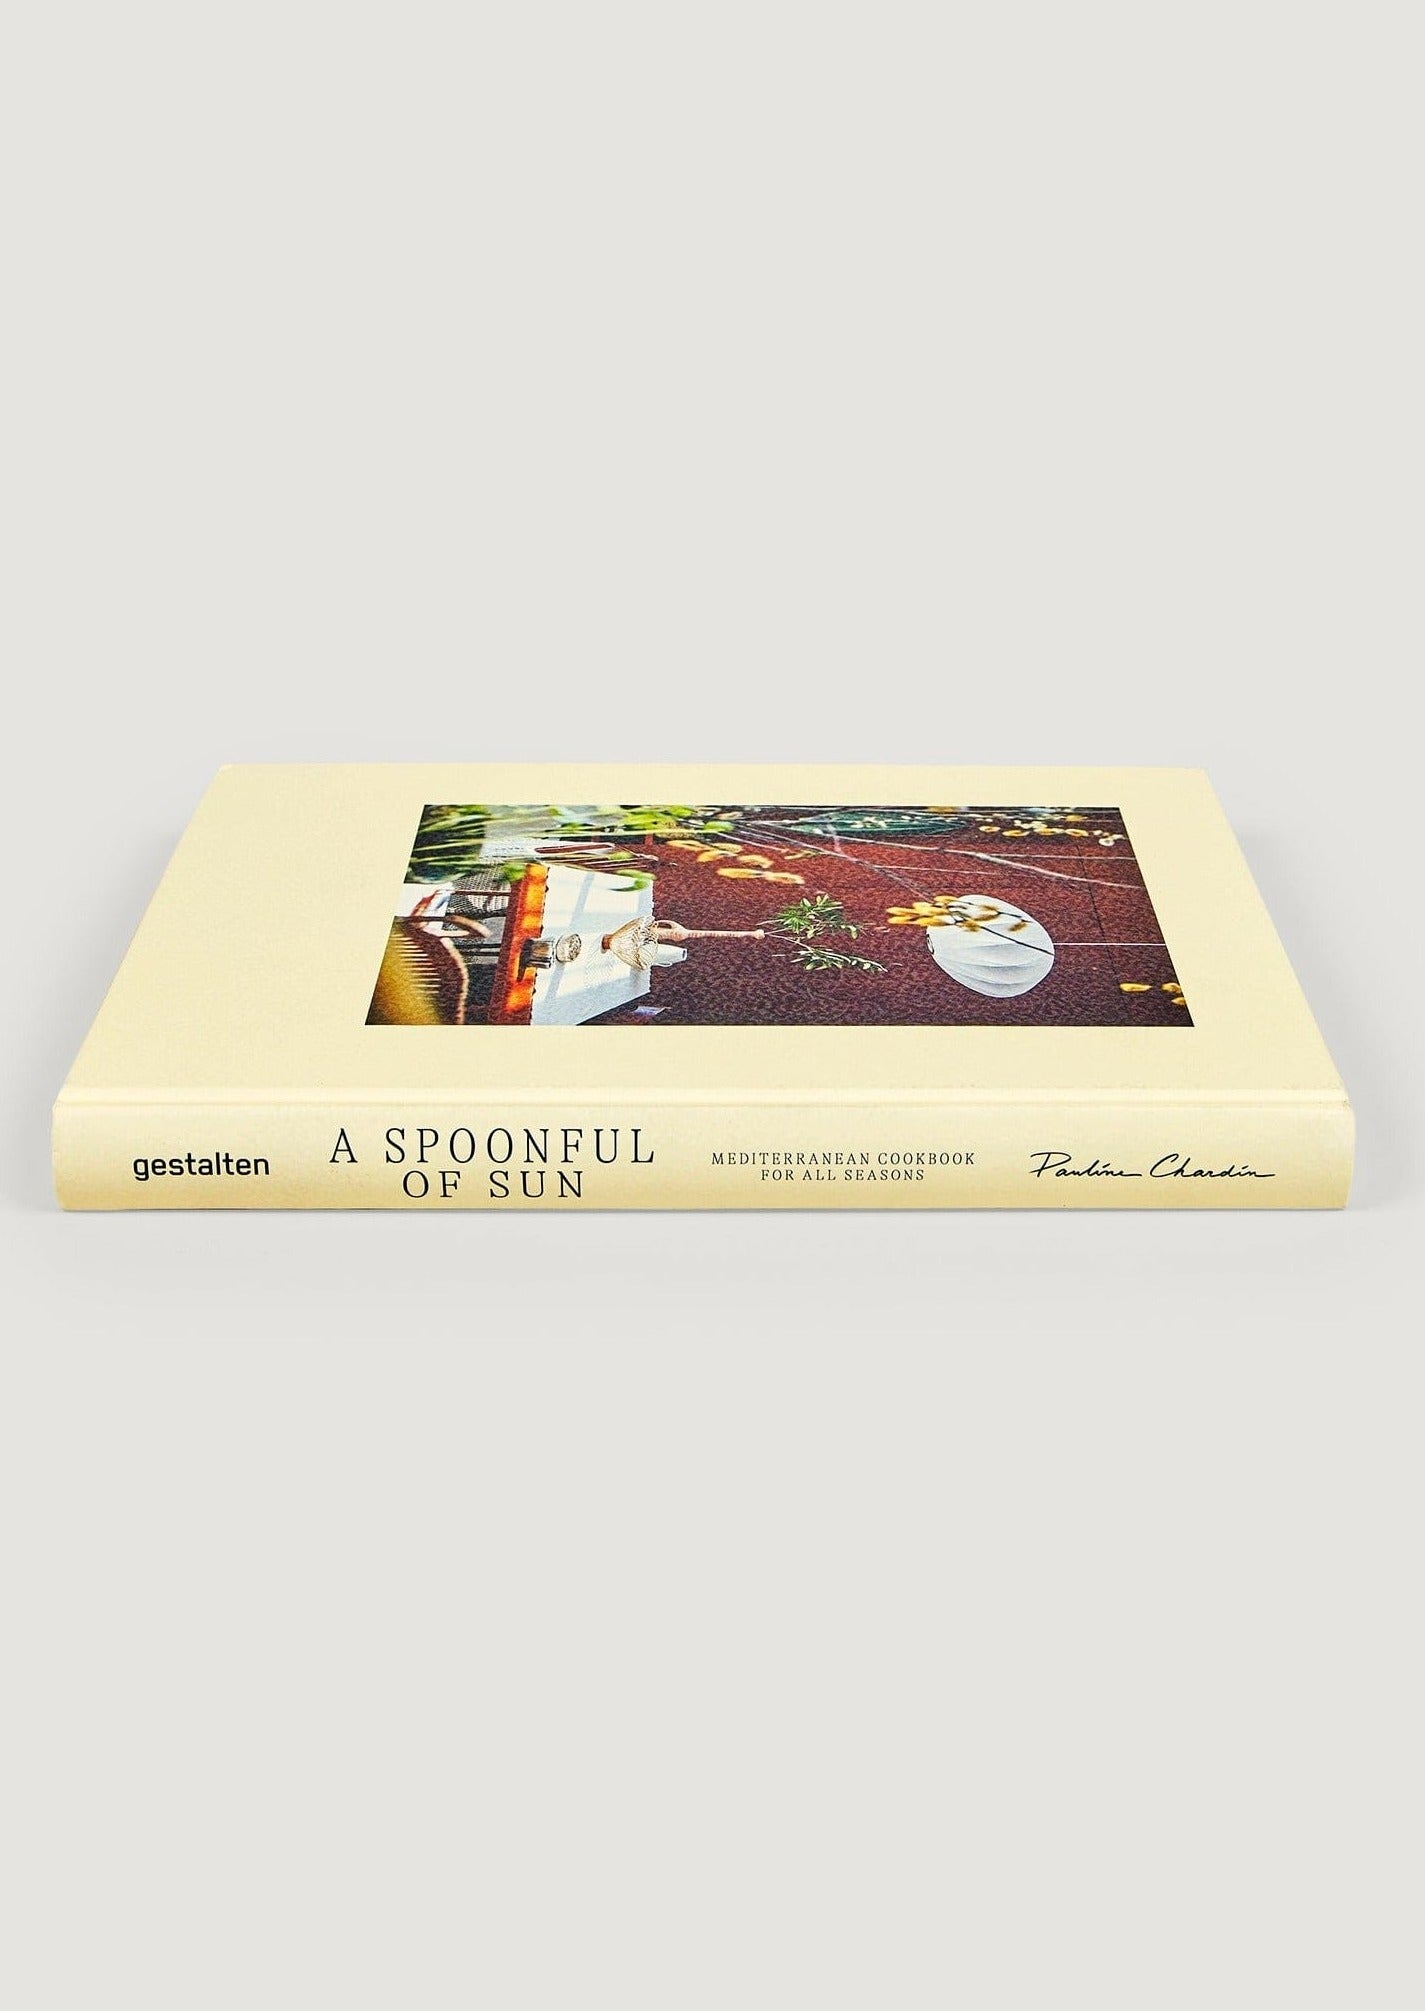 A Spoonful Of Sun Recipe Book Spine View at Afloral